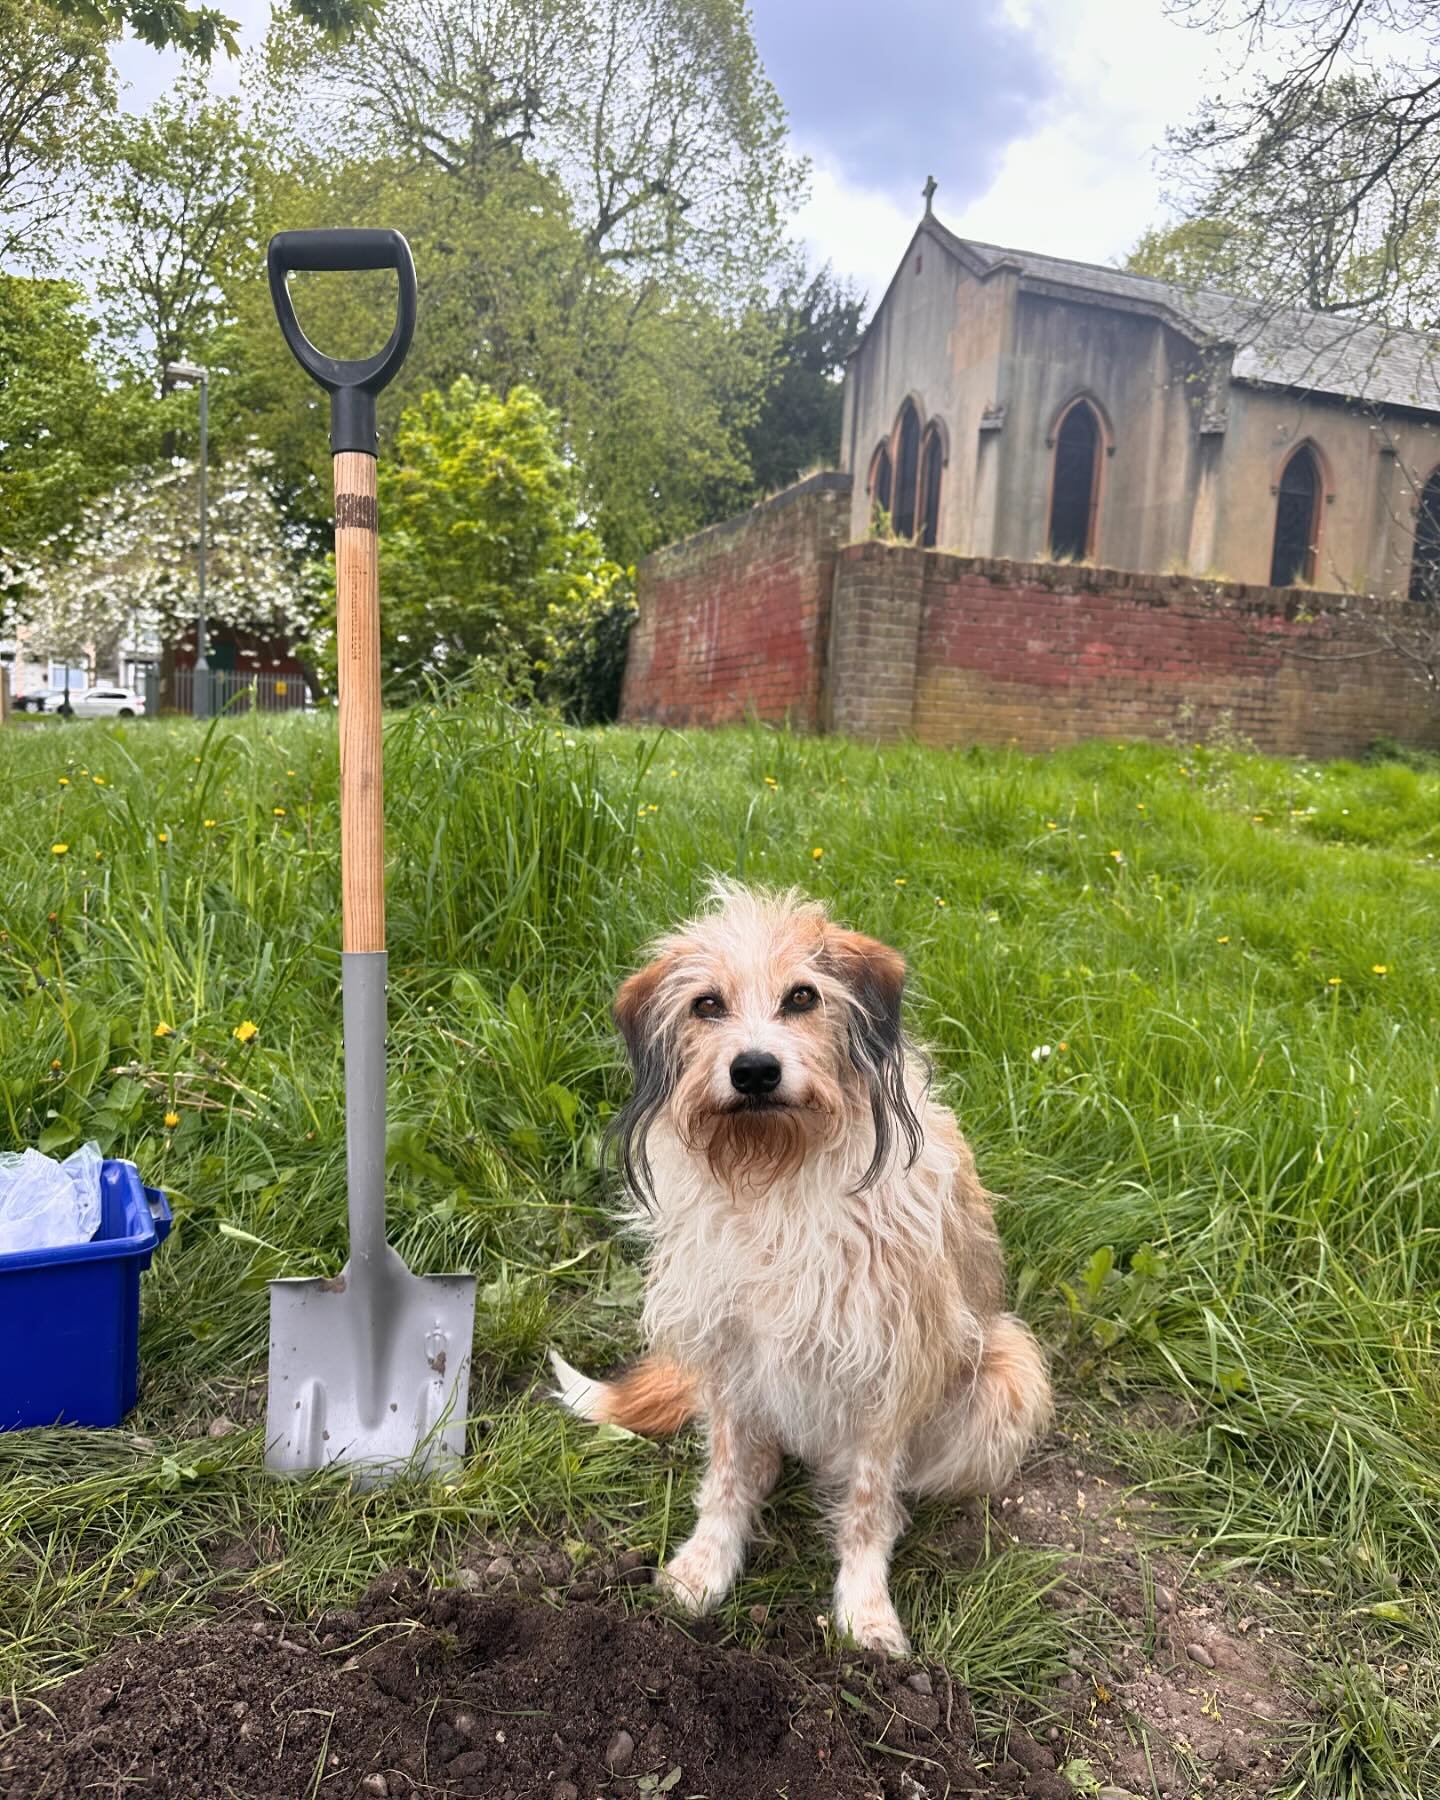 Ponti got a cameo role in Maggie the chicken&rsquo;s new BBC series. He had to dig deep to get into character&hellip;. 😏

#bbcseries #filming #filmcrewuk #filmanimals #director #filmdirector #producer #tvseries #chicken #dog #filmdog